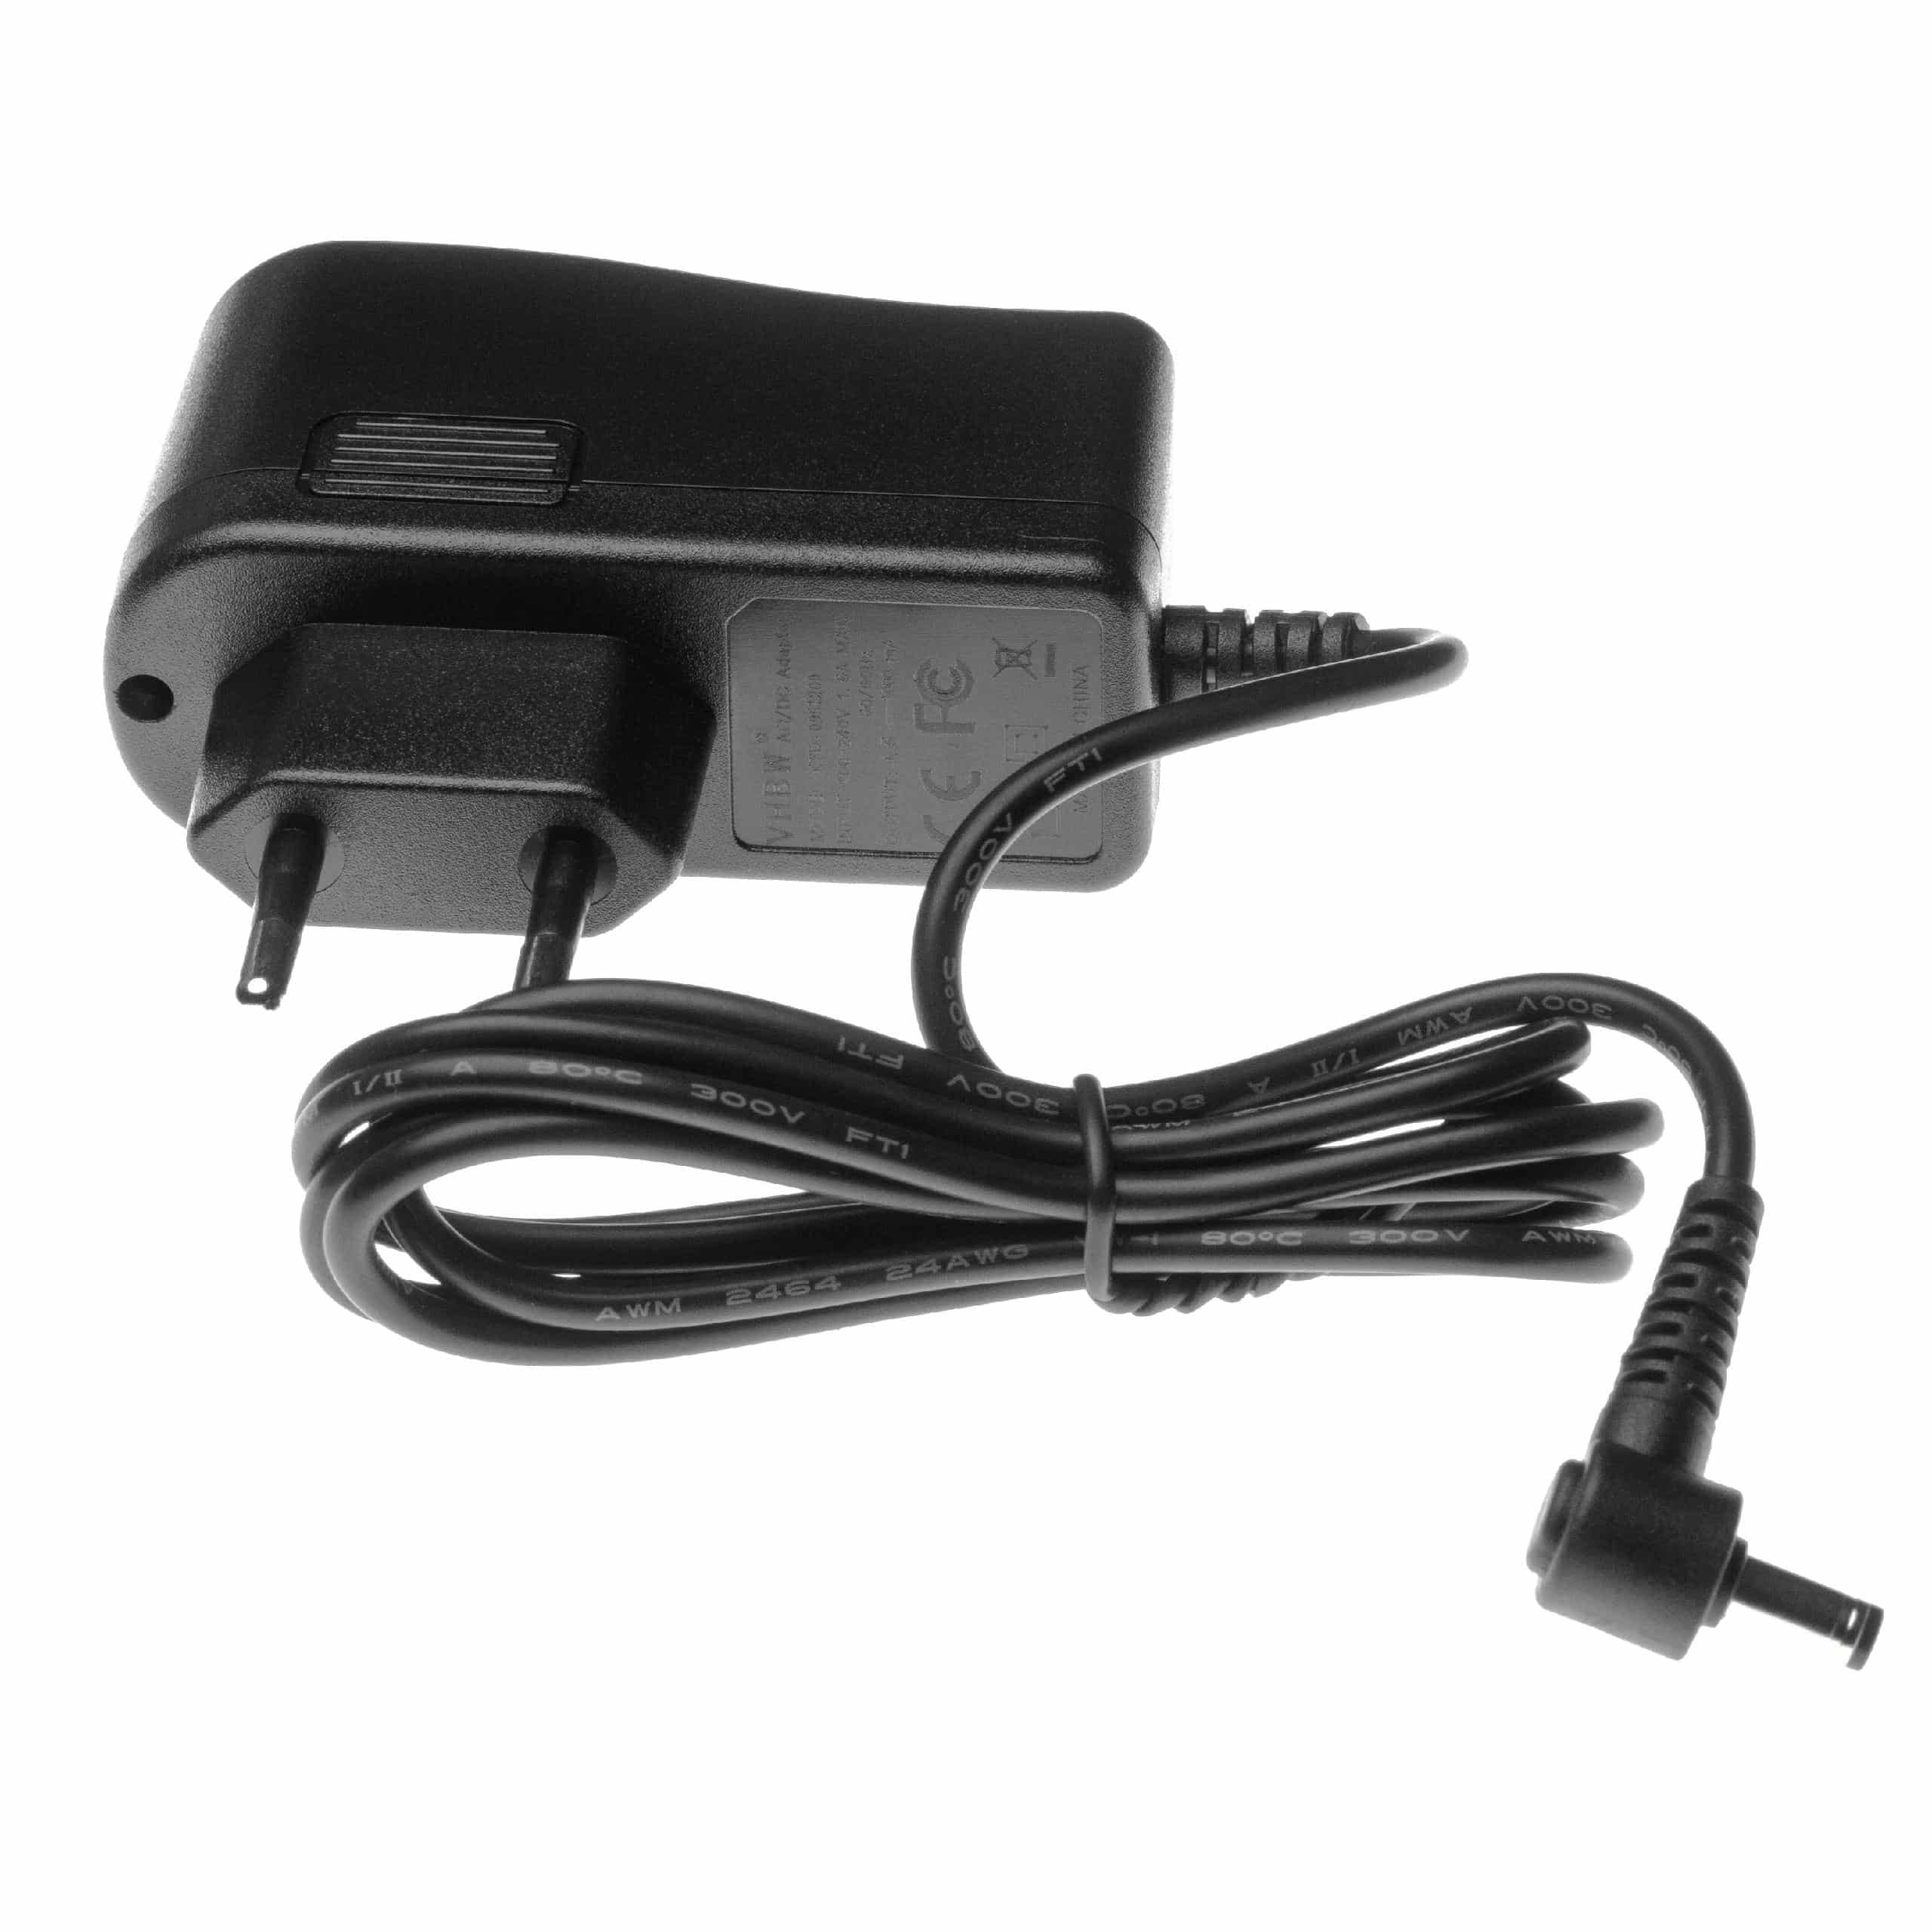 Mains Power Adapter replaces Casio AD-E95100LG for Casio Keyboard, E-Piano - 114 cm